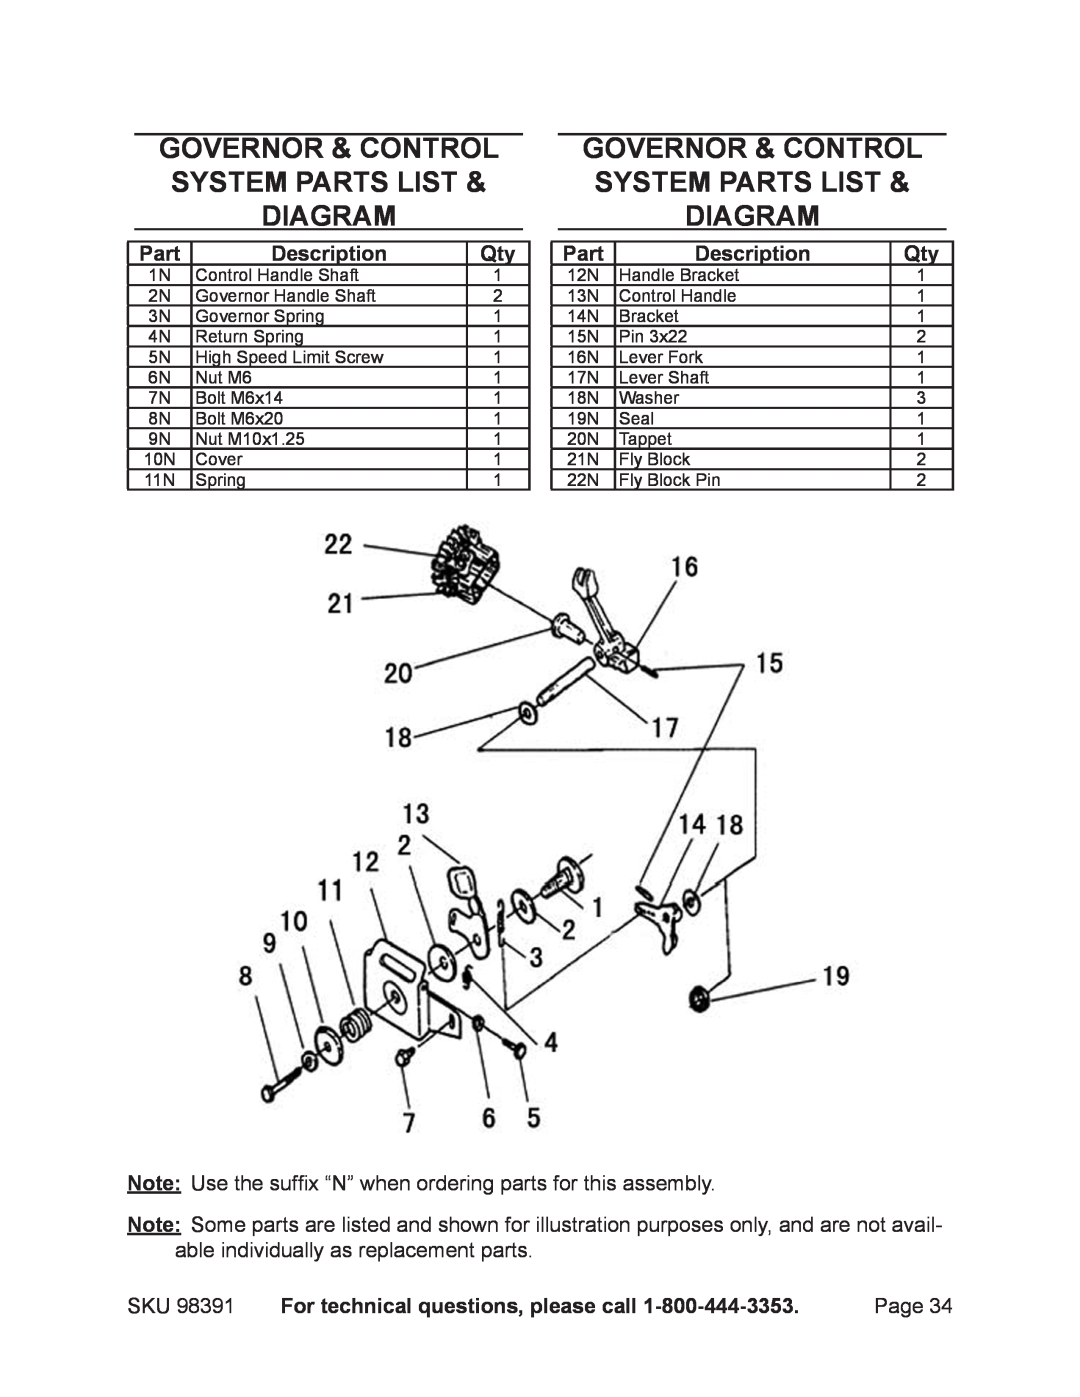 Chicago Electric 98391 Governor & Control System Parts List & Diagram, Description, For technical questions, please call 